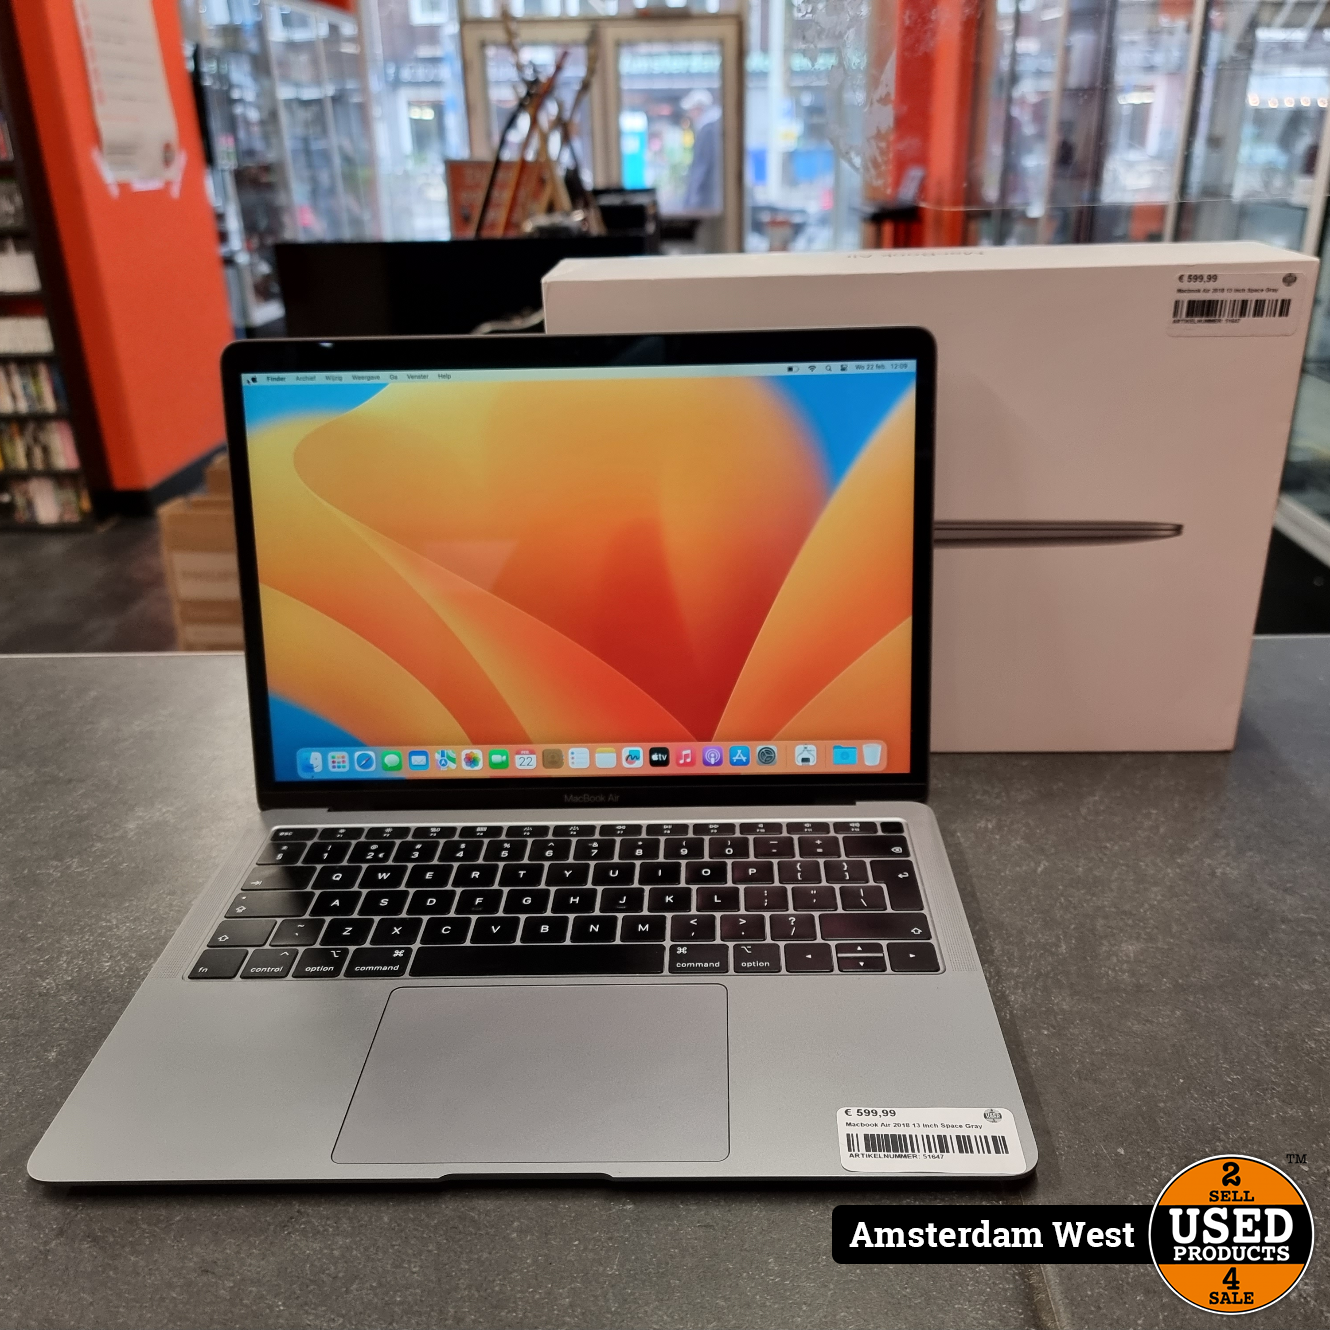 Apple Macbook Air 13 Inch Space Gray | Nette staat - Used Products Amsterdam West